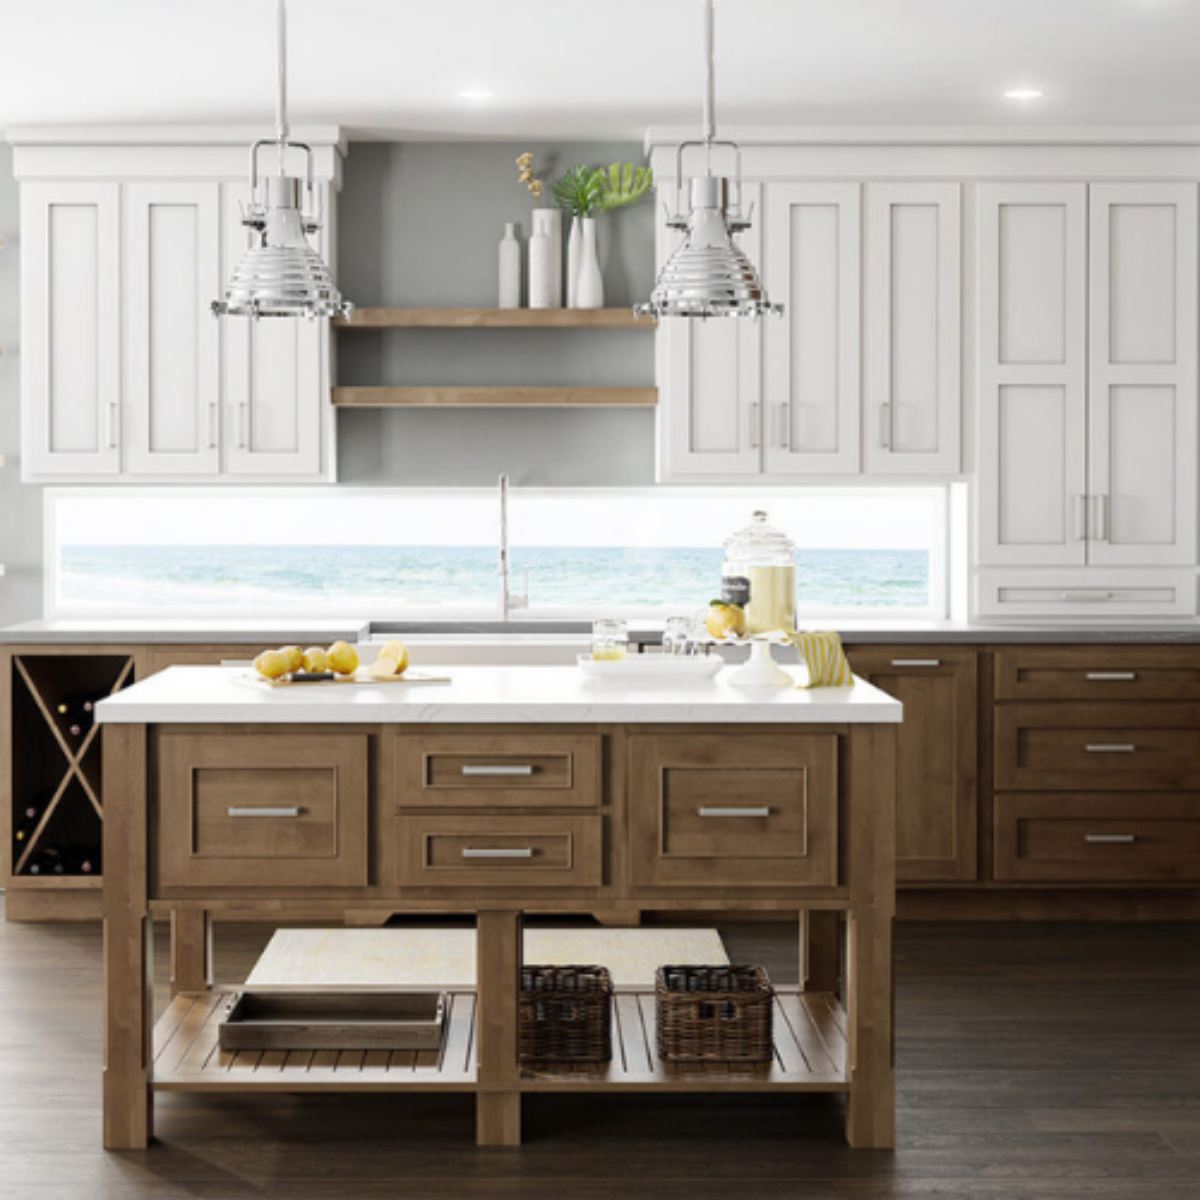 Dura Supreme Cabinetry Reasons To Love